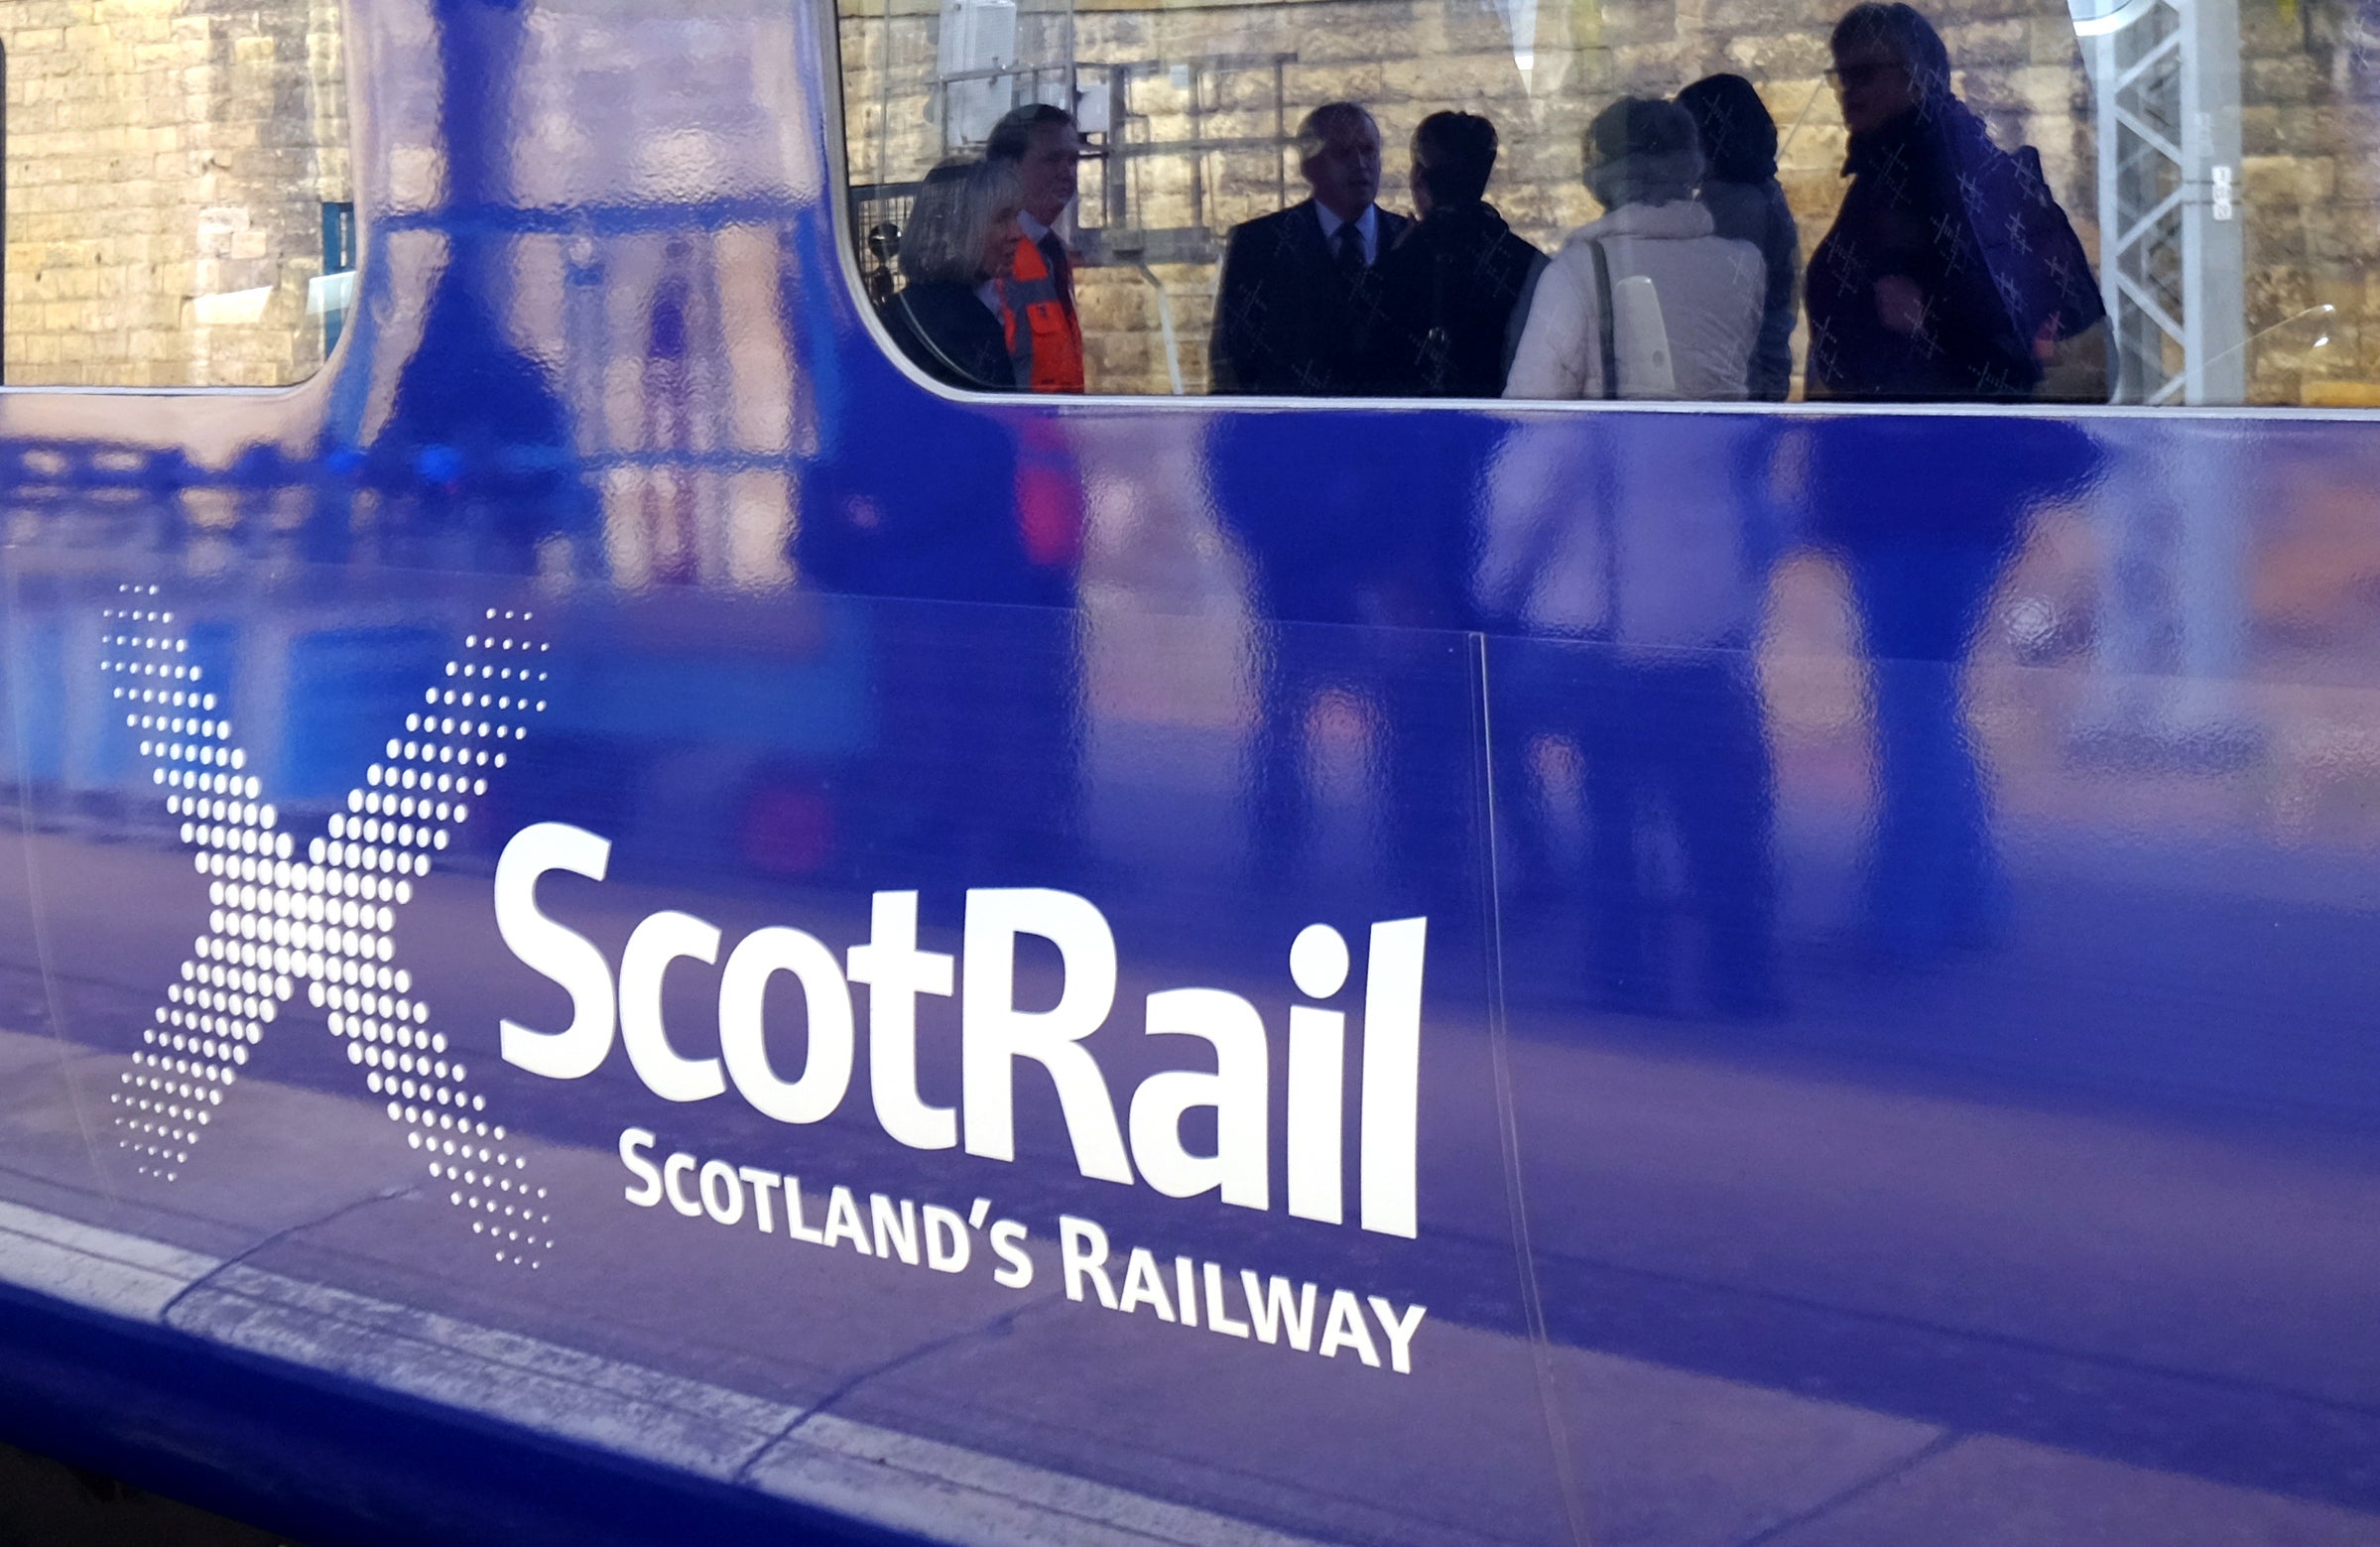 The First Minister is being urged to act to stop proposed changes to ticket office services in Scotland (PA)